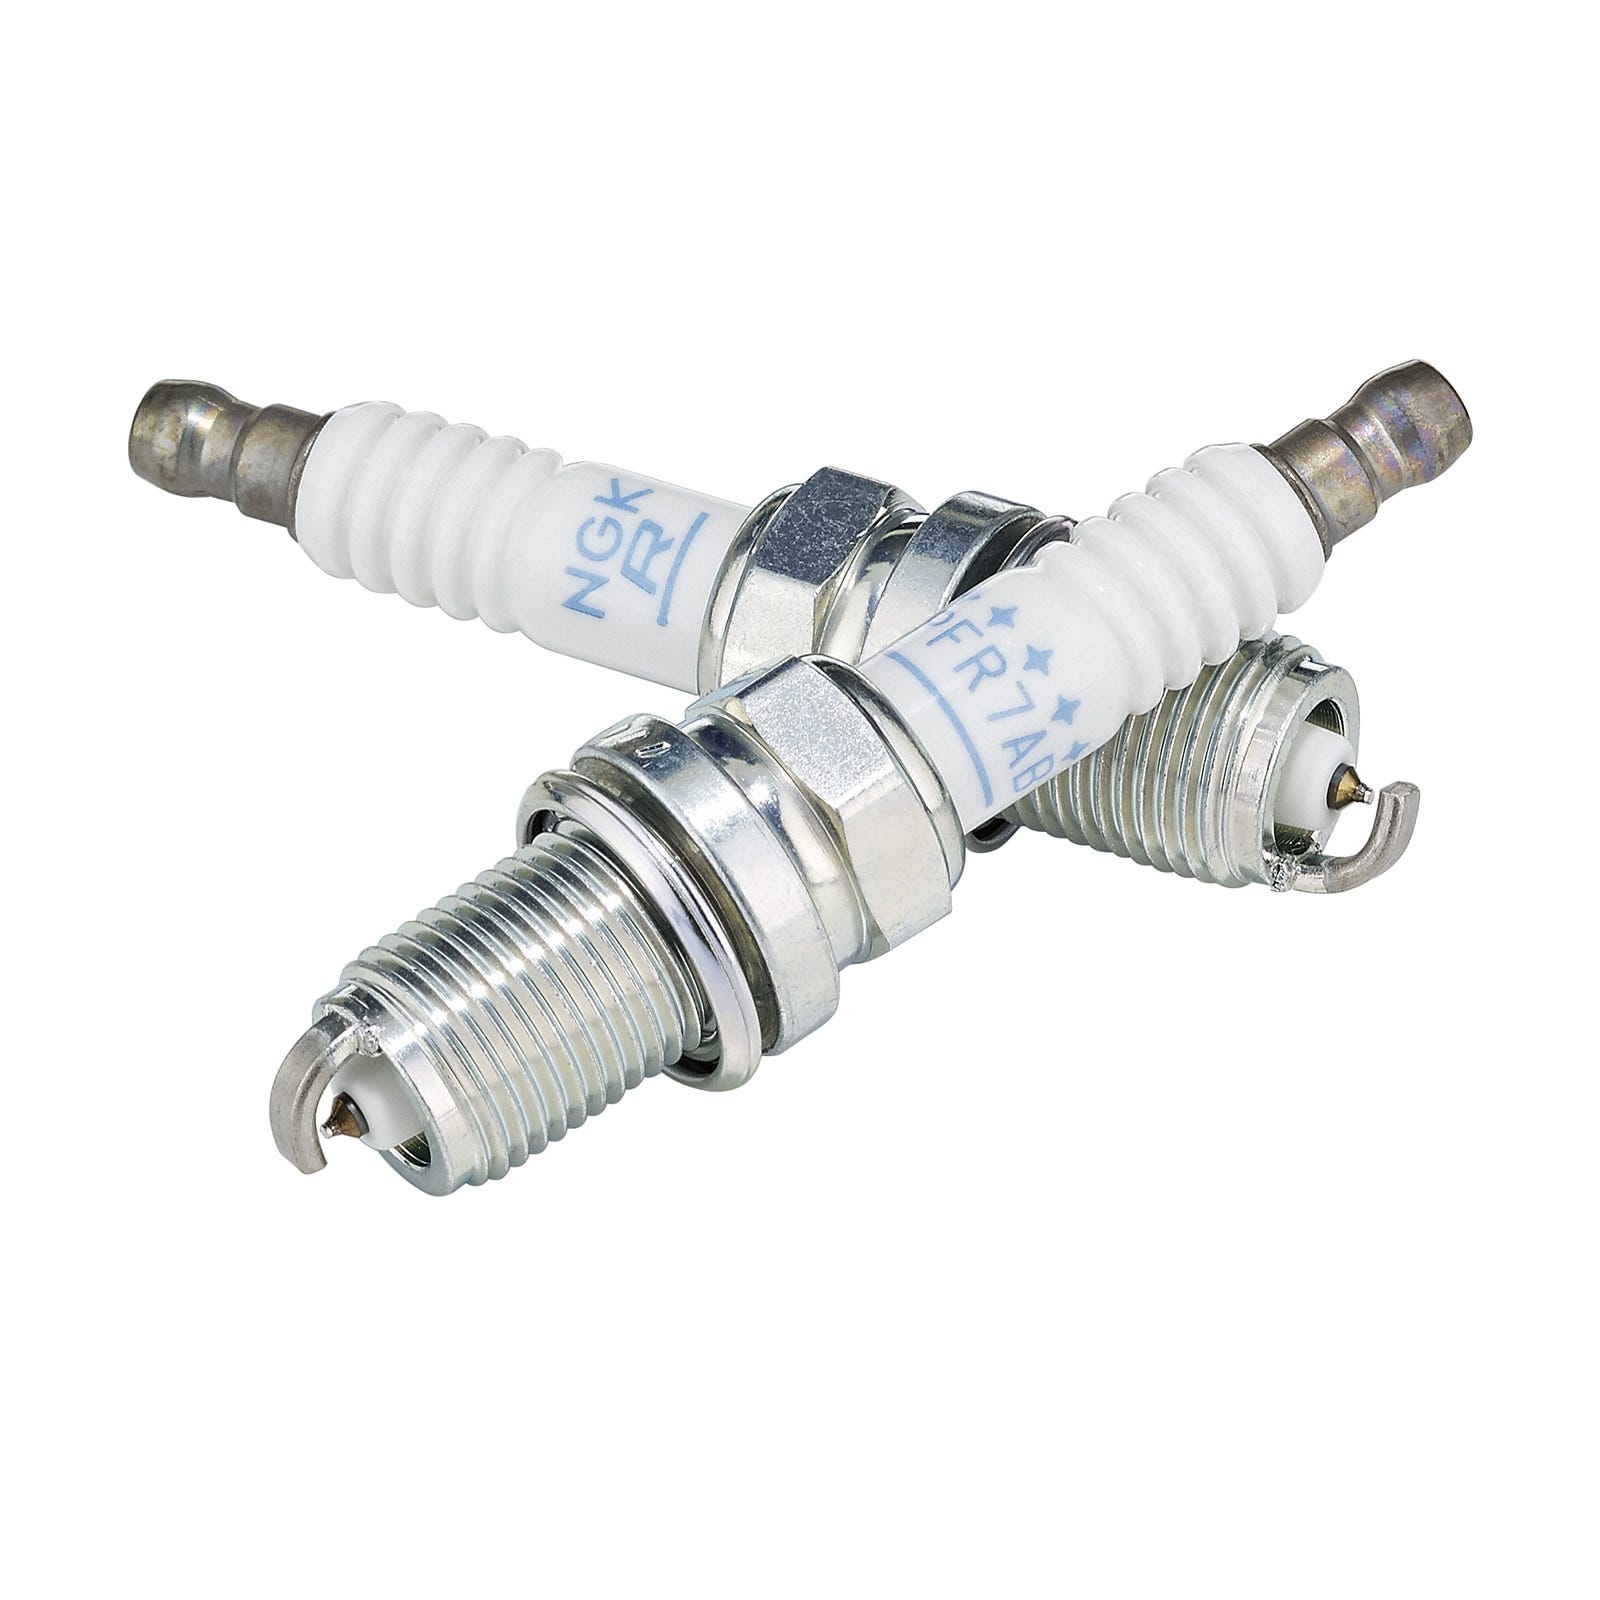 NGK Spark Plugs - 415129375 - The Parts Lodge